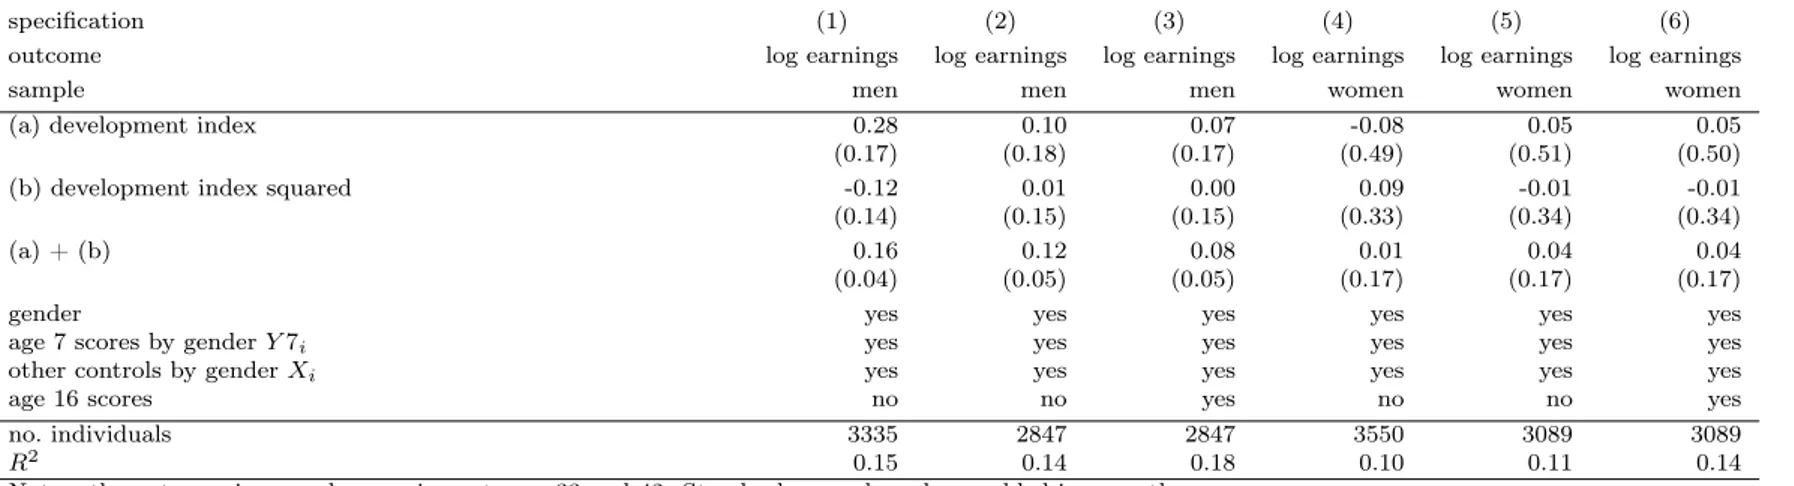 Table 7: Regression estimates of the pubertal development gradient in earnings.